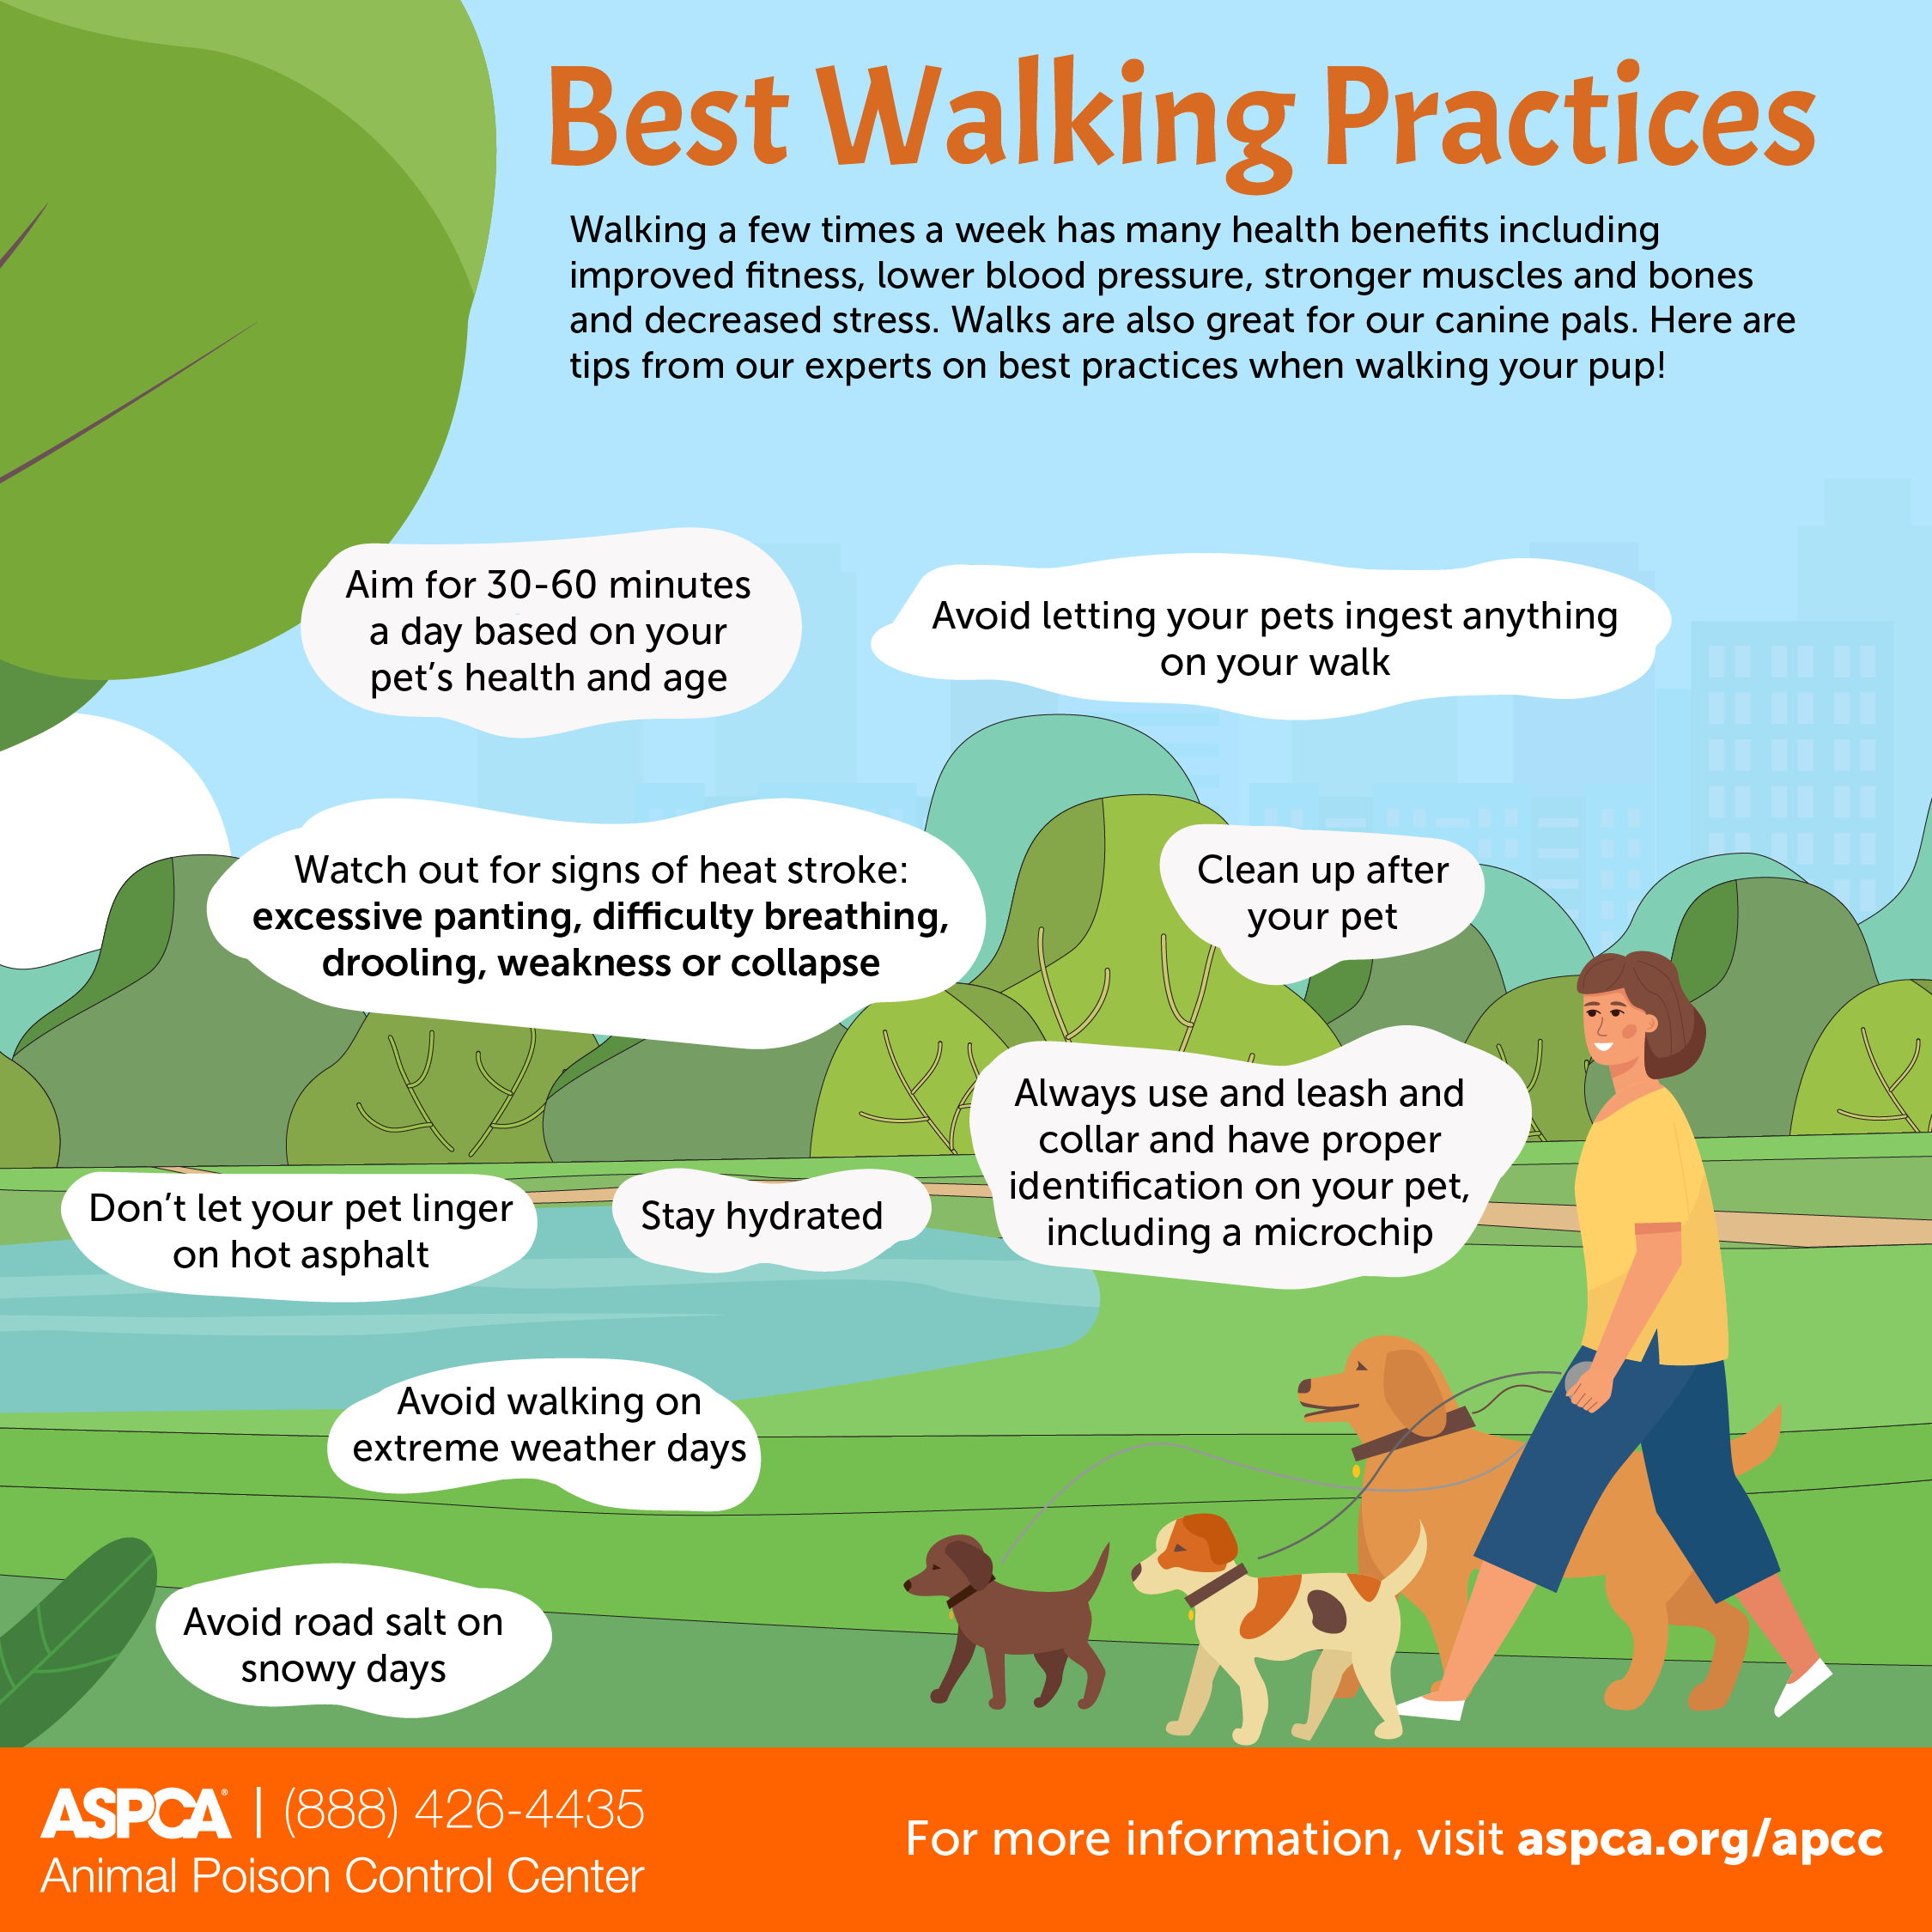 How to Get the Most Out of Your Walk